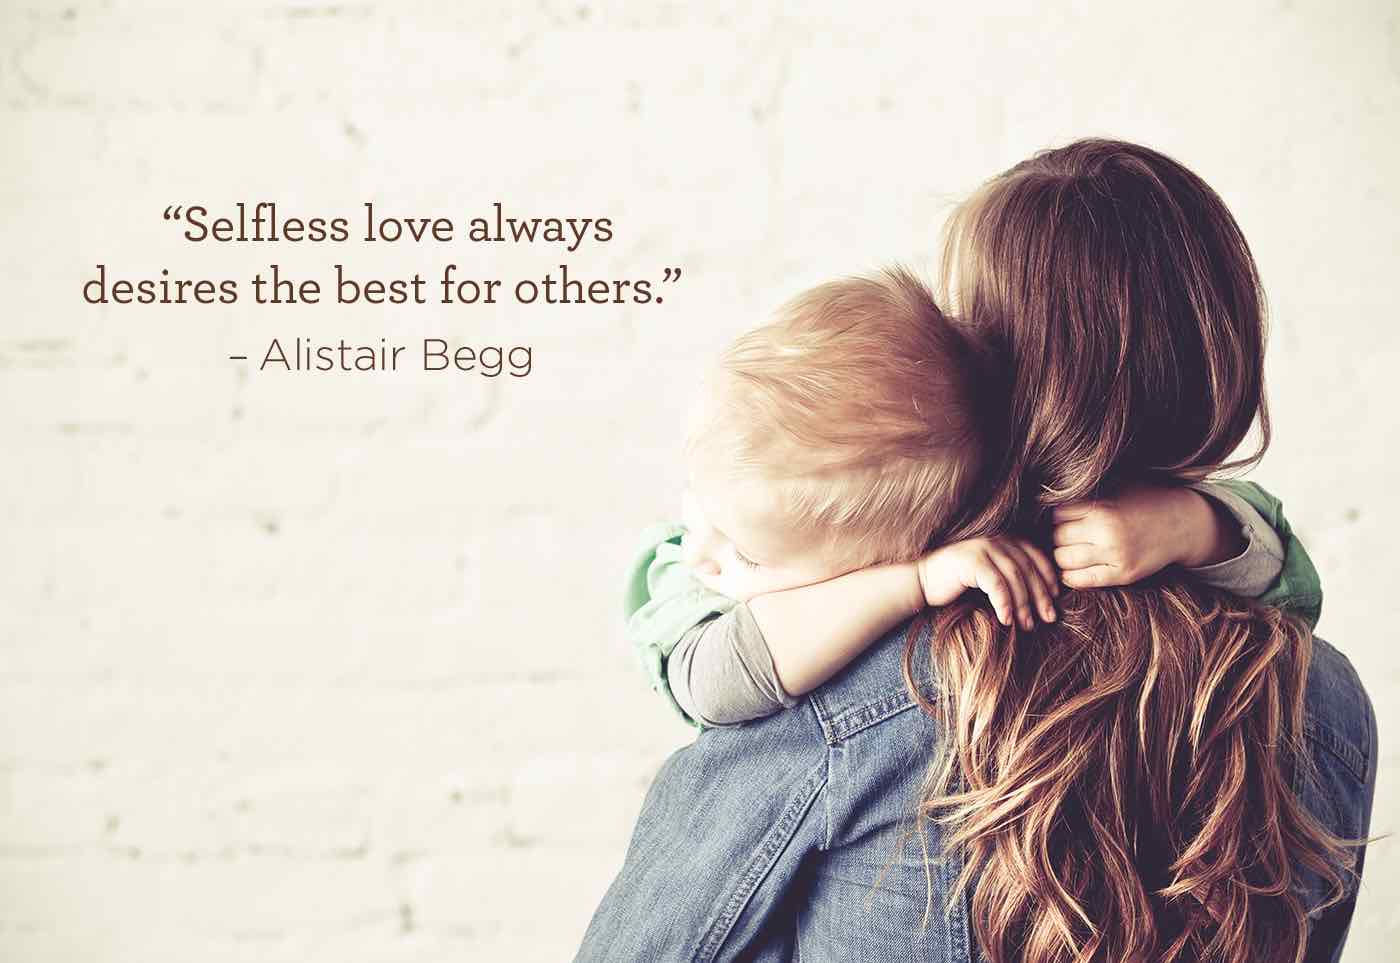 thumbnail image for Selfless love always desires the best for others